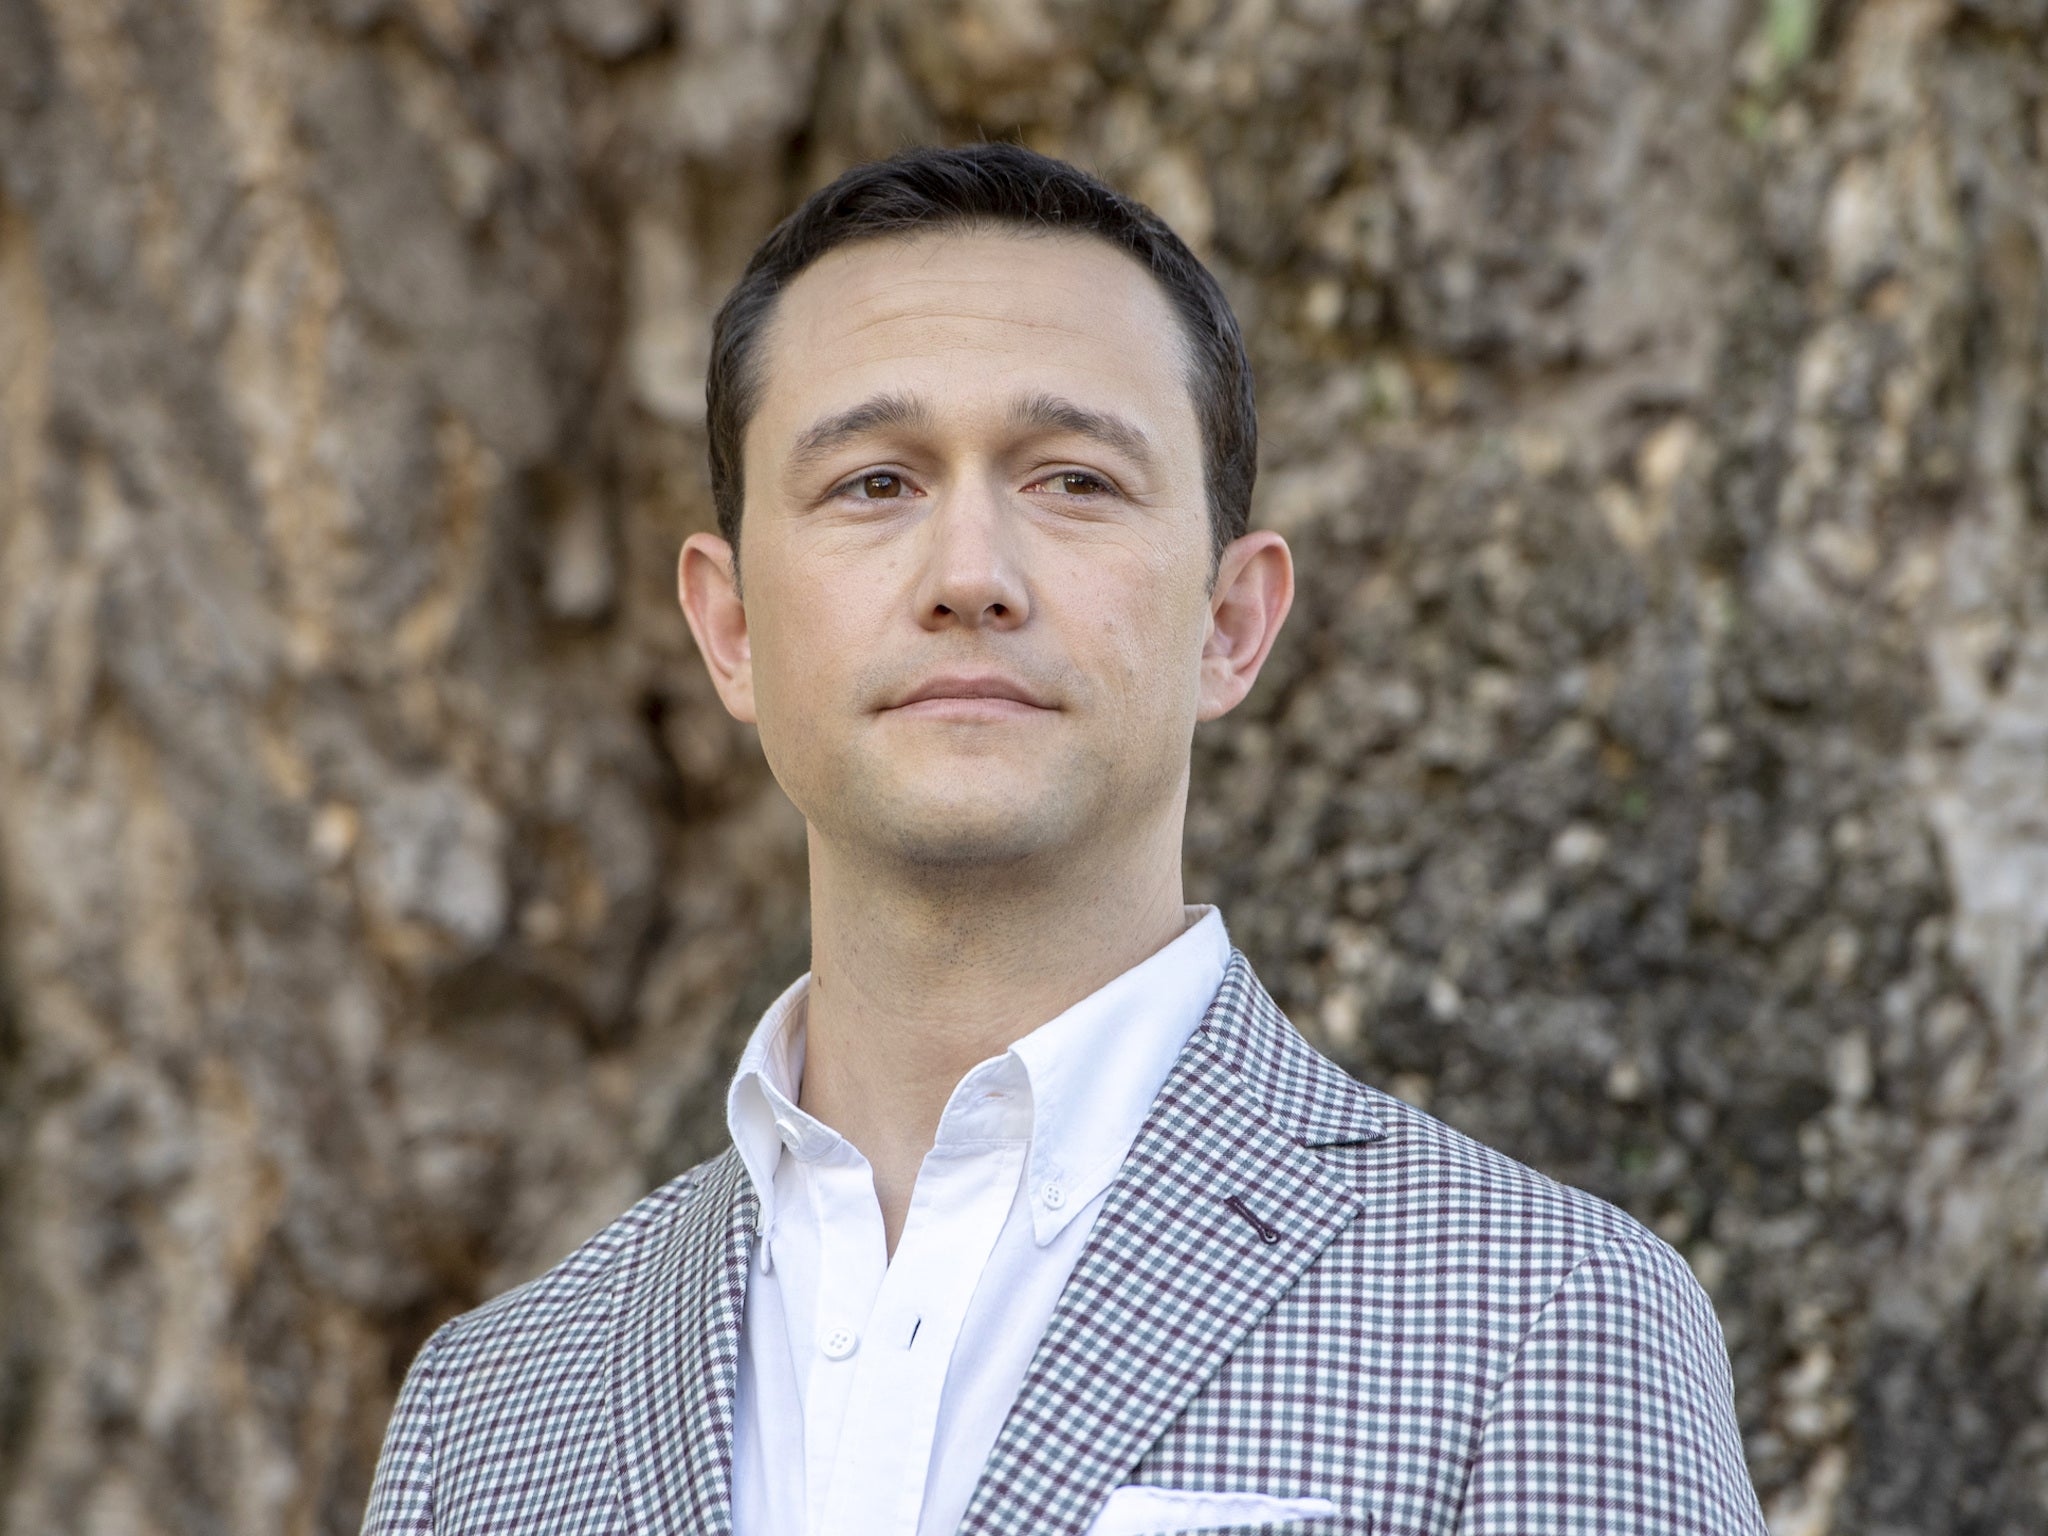 At the age of 10, Joseph Gordon-Levitt starred opposite Brad Pitt in ‘A River Runs Through It’. Now at 41, his diverse career has led him to play Uber CEO Travis Kalanick in ‘Super Pumped’